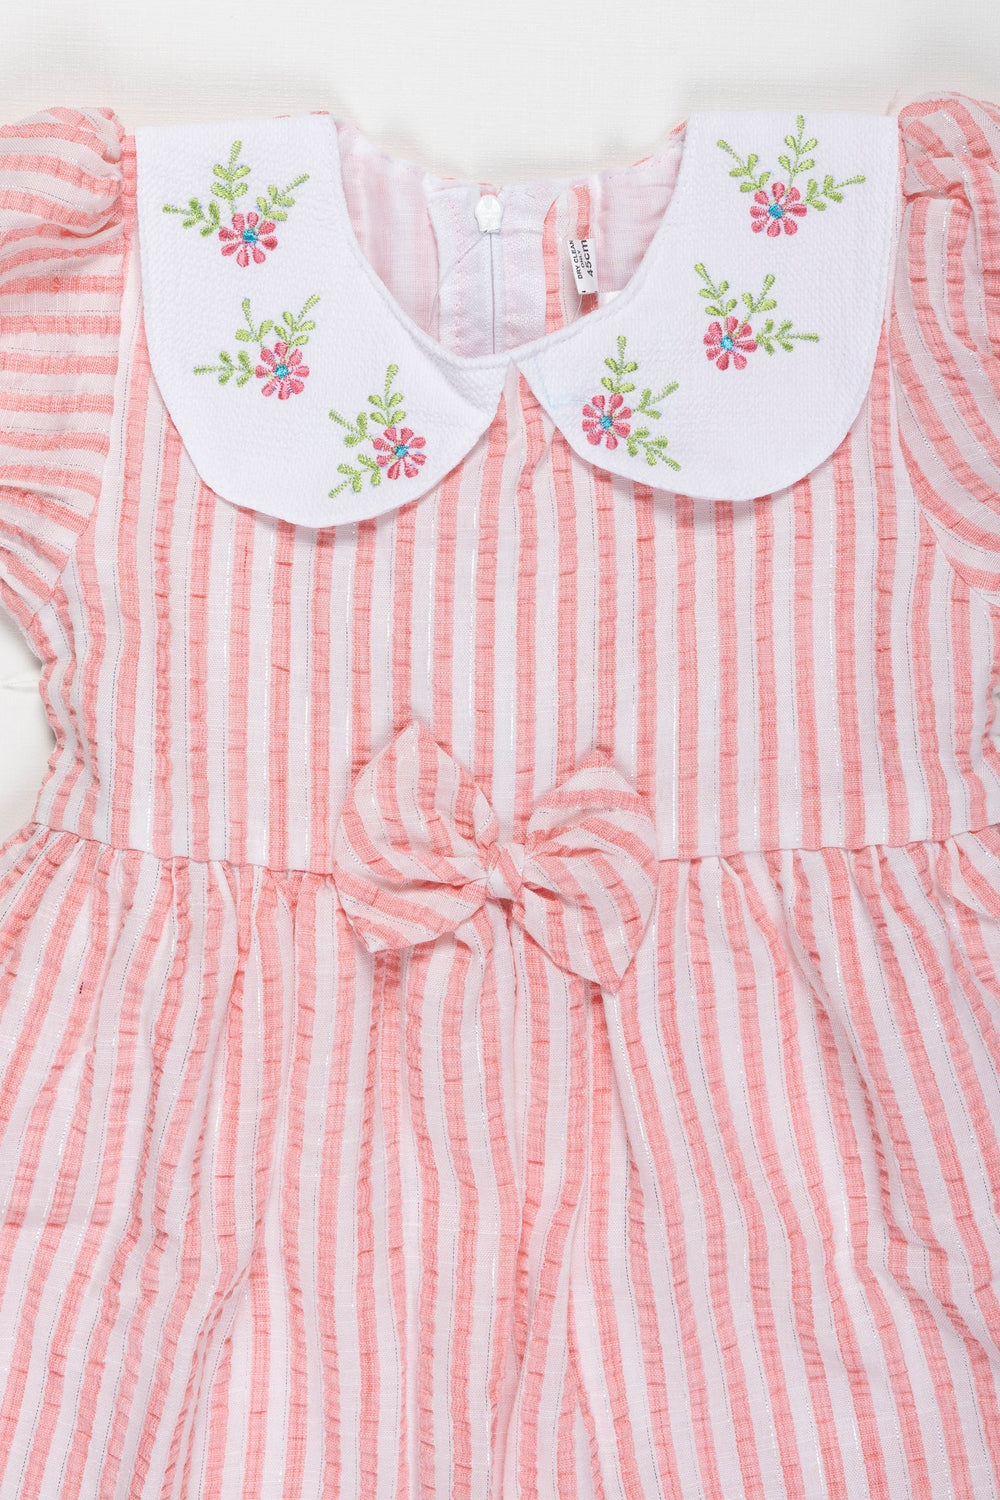 The Nesavu Baby Cotton Frocks Candy Stripe Whisper Frock with Embroidered Peter Pan Collar for Baby Girls Nesavu Embroidered Collar Baby Girl Frock in Candy Stripes | Unique Summer Wear | The Nesavu